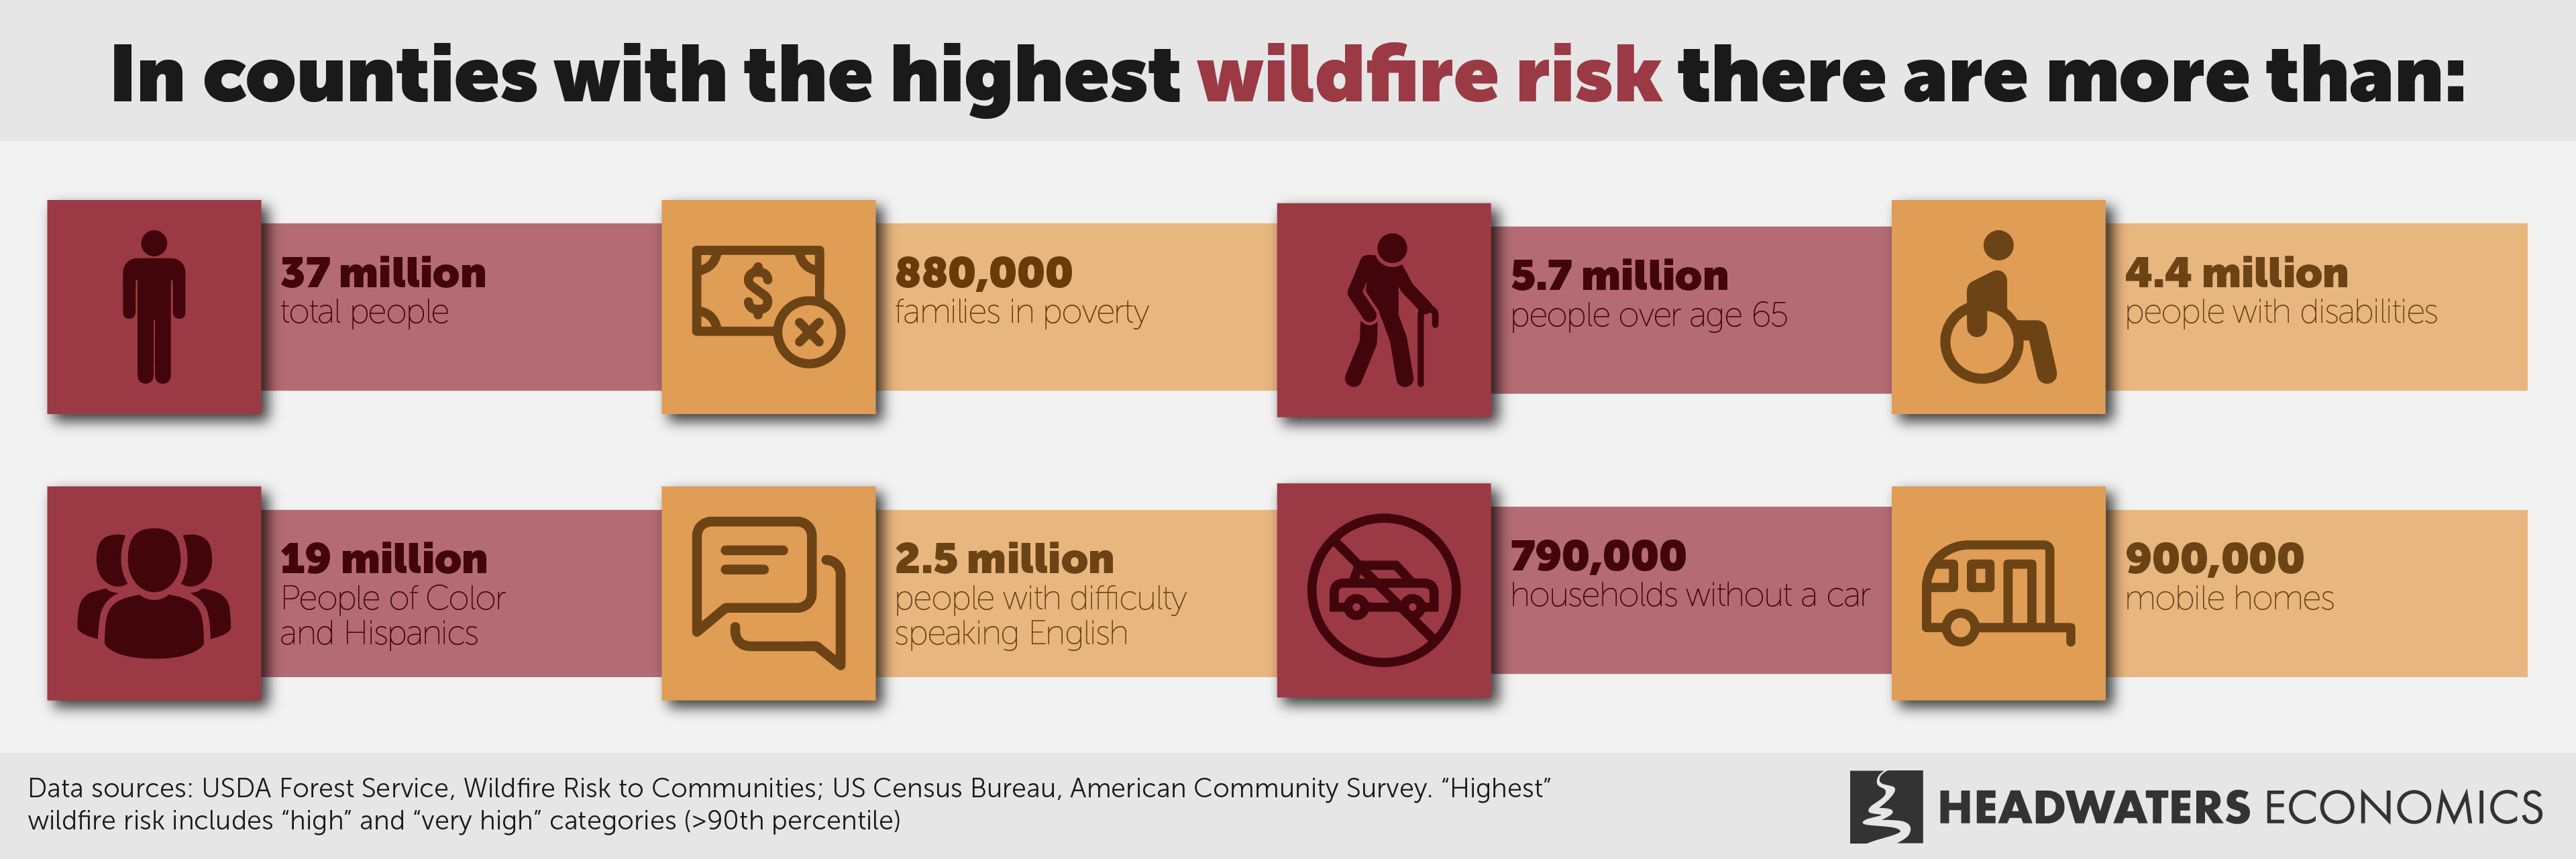 In counties with the highest wildfire risk there are more than: 37 million total people, 880,000 families in poverty, 5.7 million people over the age 65, 4.4 million people with disabilities, 19 million People of Color and Hispanics, 2.5 million people with difficulty speaking English, 790,000 households without a car, and 900,000 mobile homes.